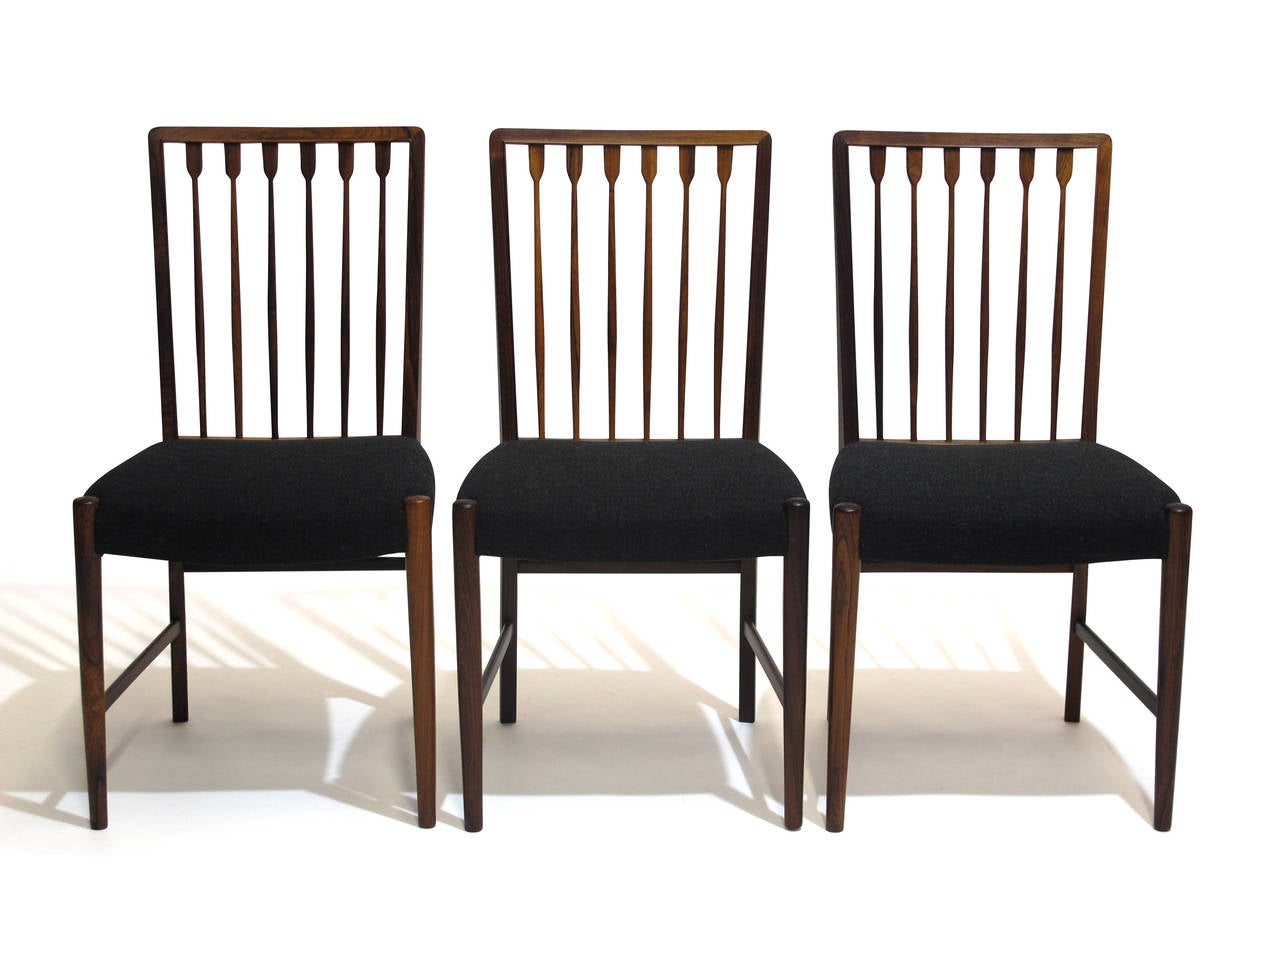 Elegant rosewood dining chairs by master cabinetmaker Georg Kofoed, circa 1938. Solid rosewood with hand carved sculpted spindles on back rest, round tapered legs with cross stretchers. Newly upholstered in a dark grey wool textile; over the